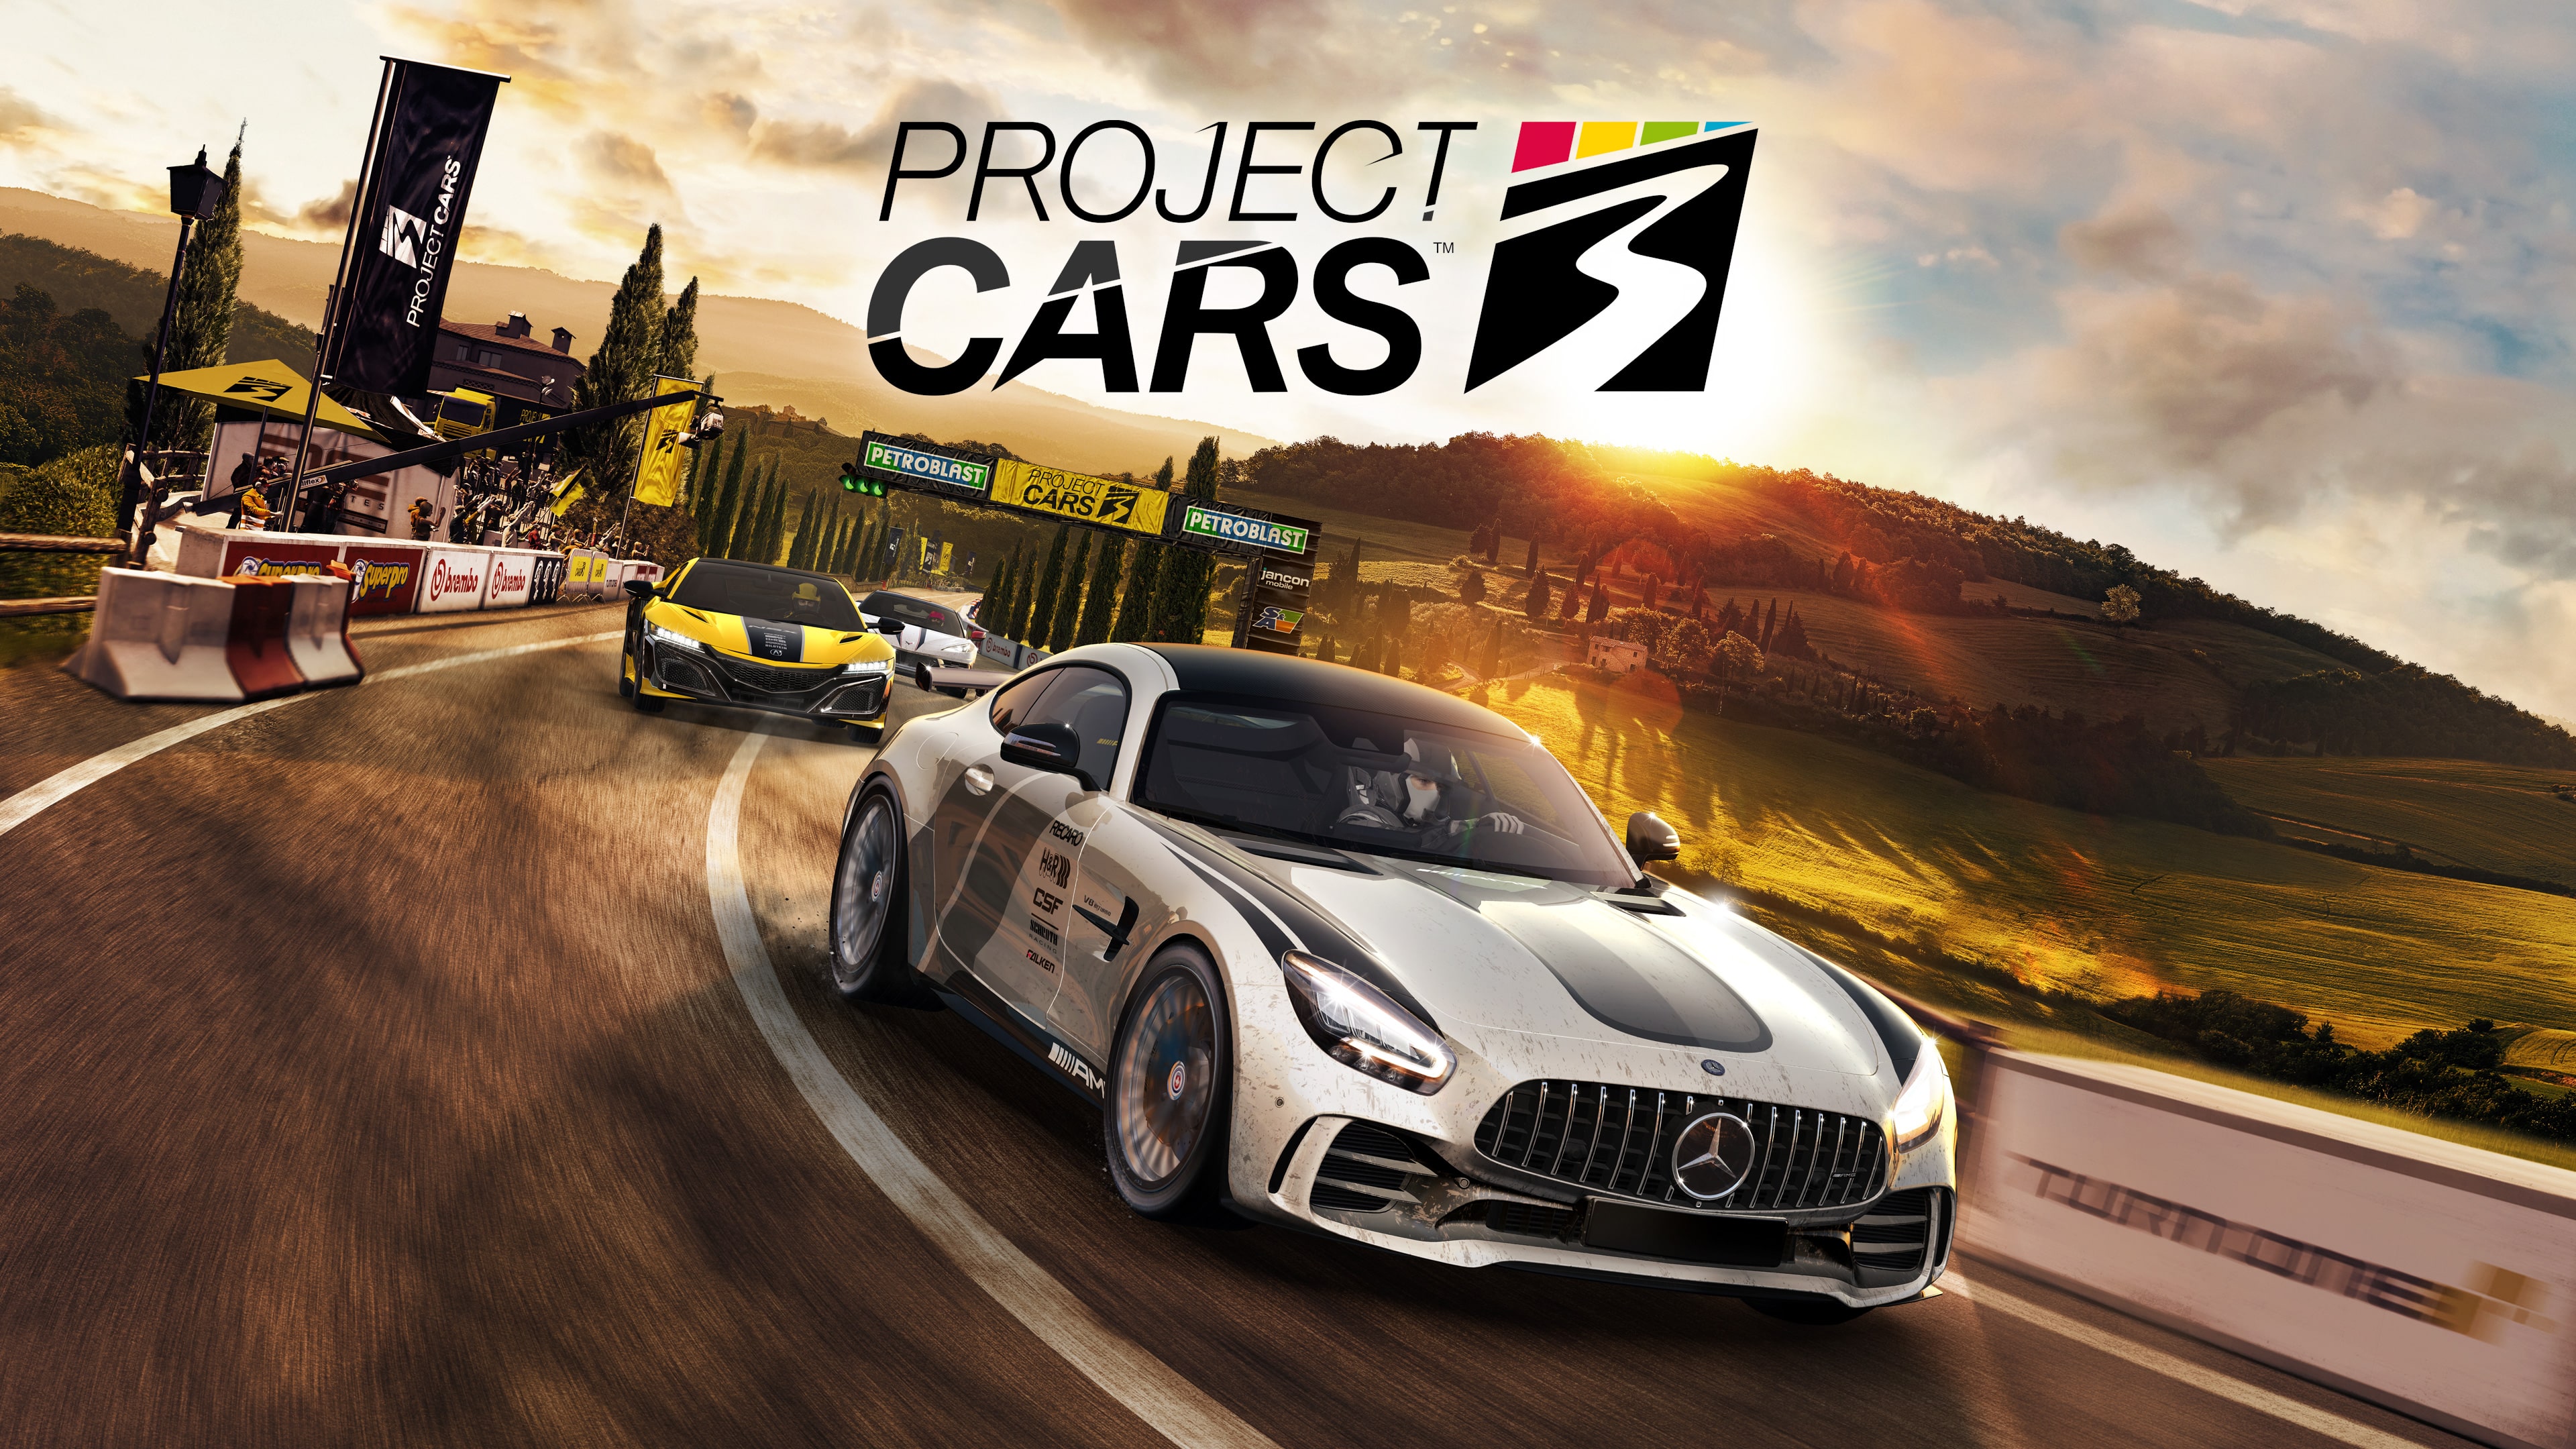 Project CARS 3 (Simplified Chinese, Korean, Traditional Chinese)